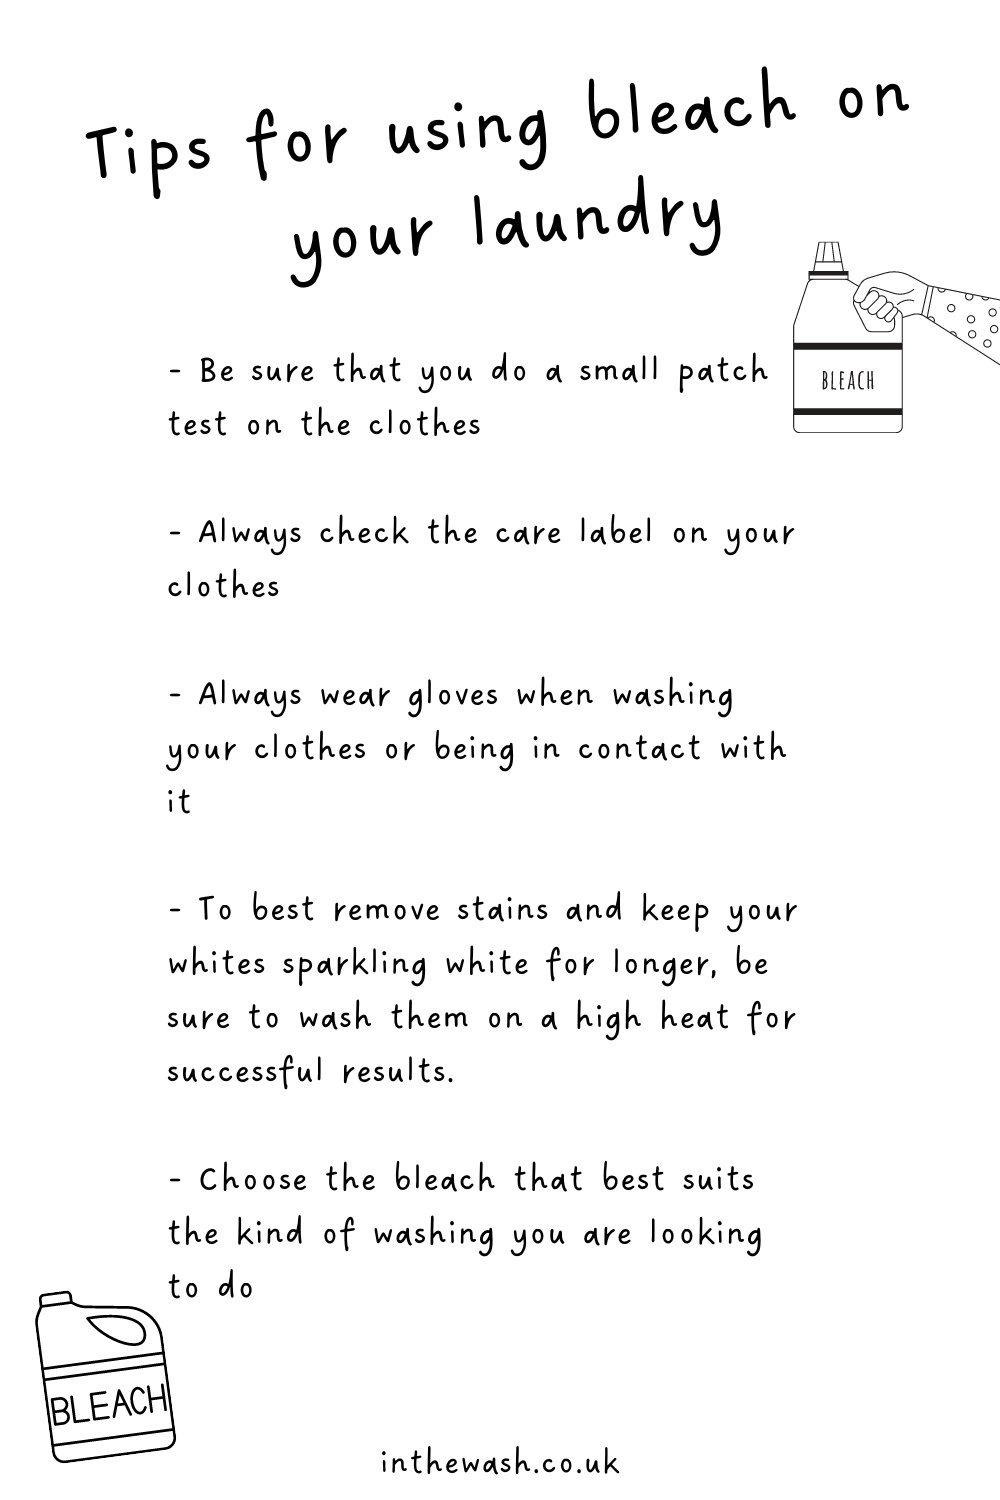 Tips for using bleach on your laundry